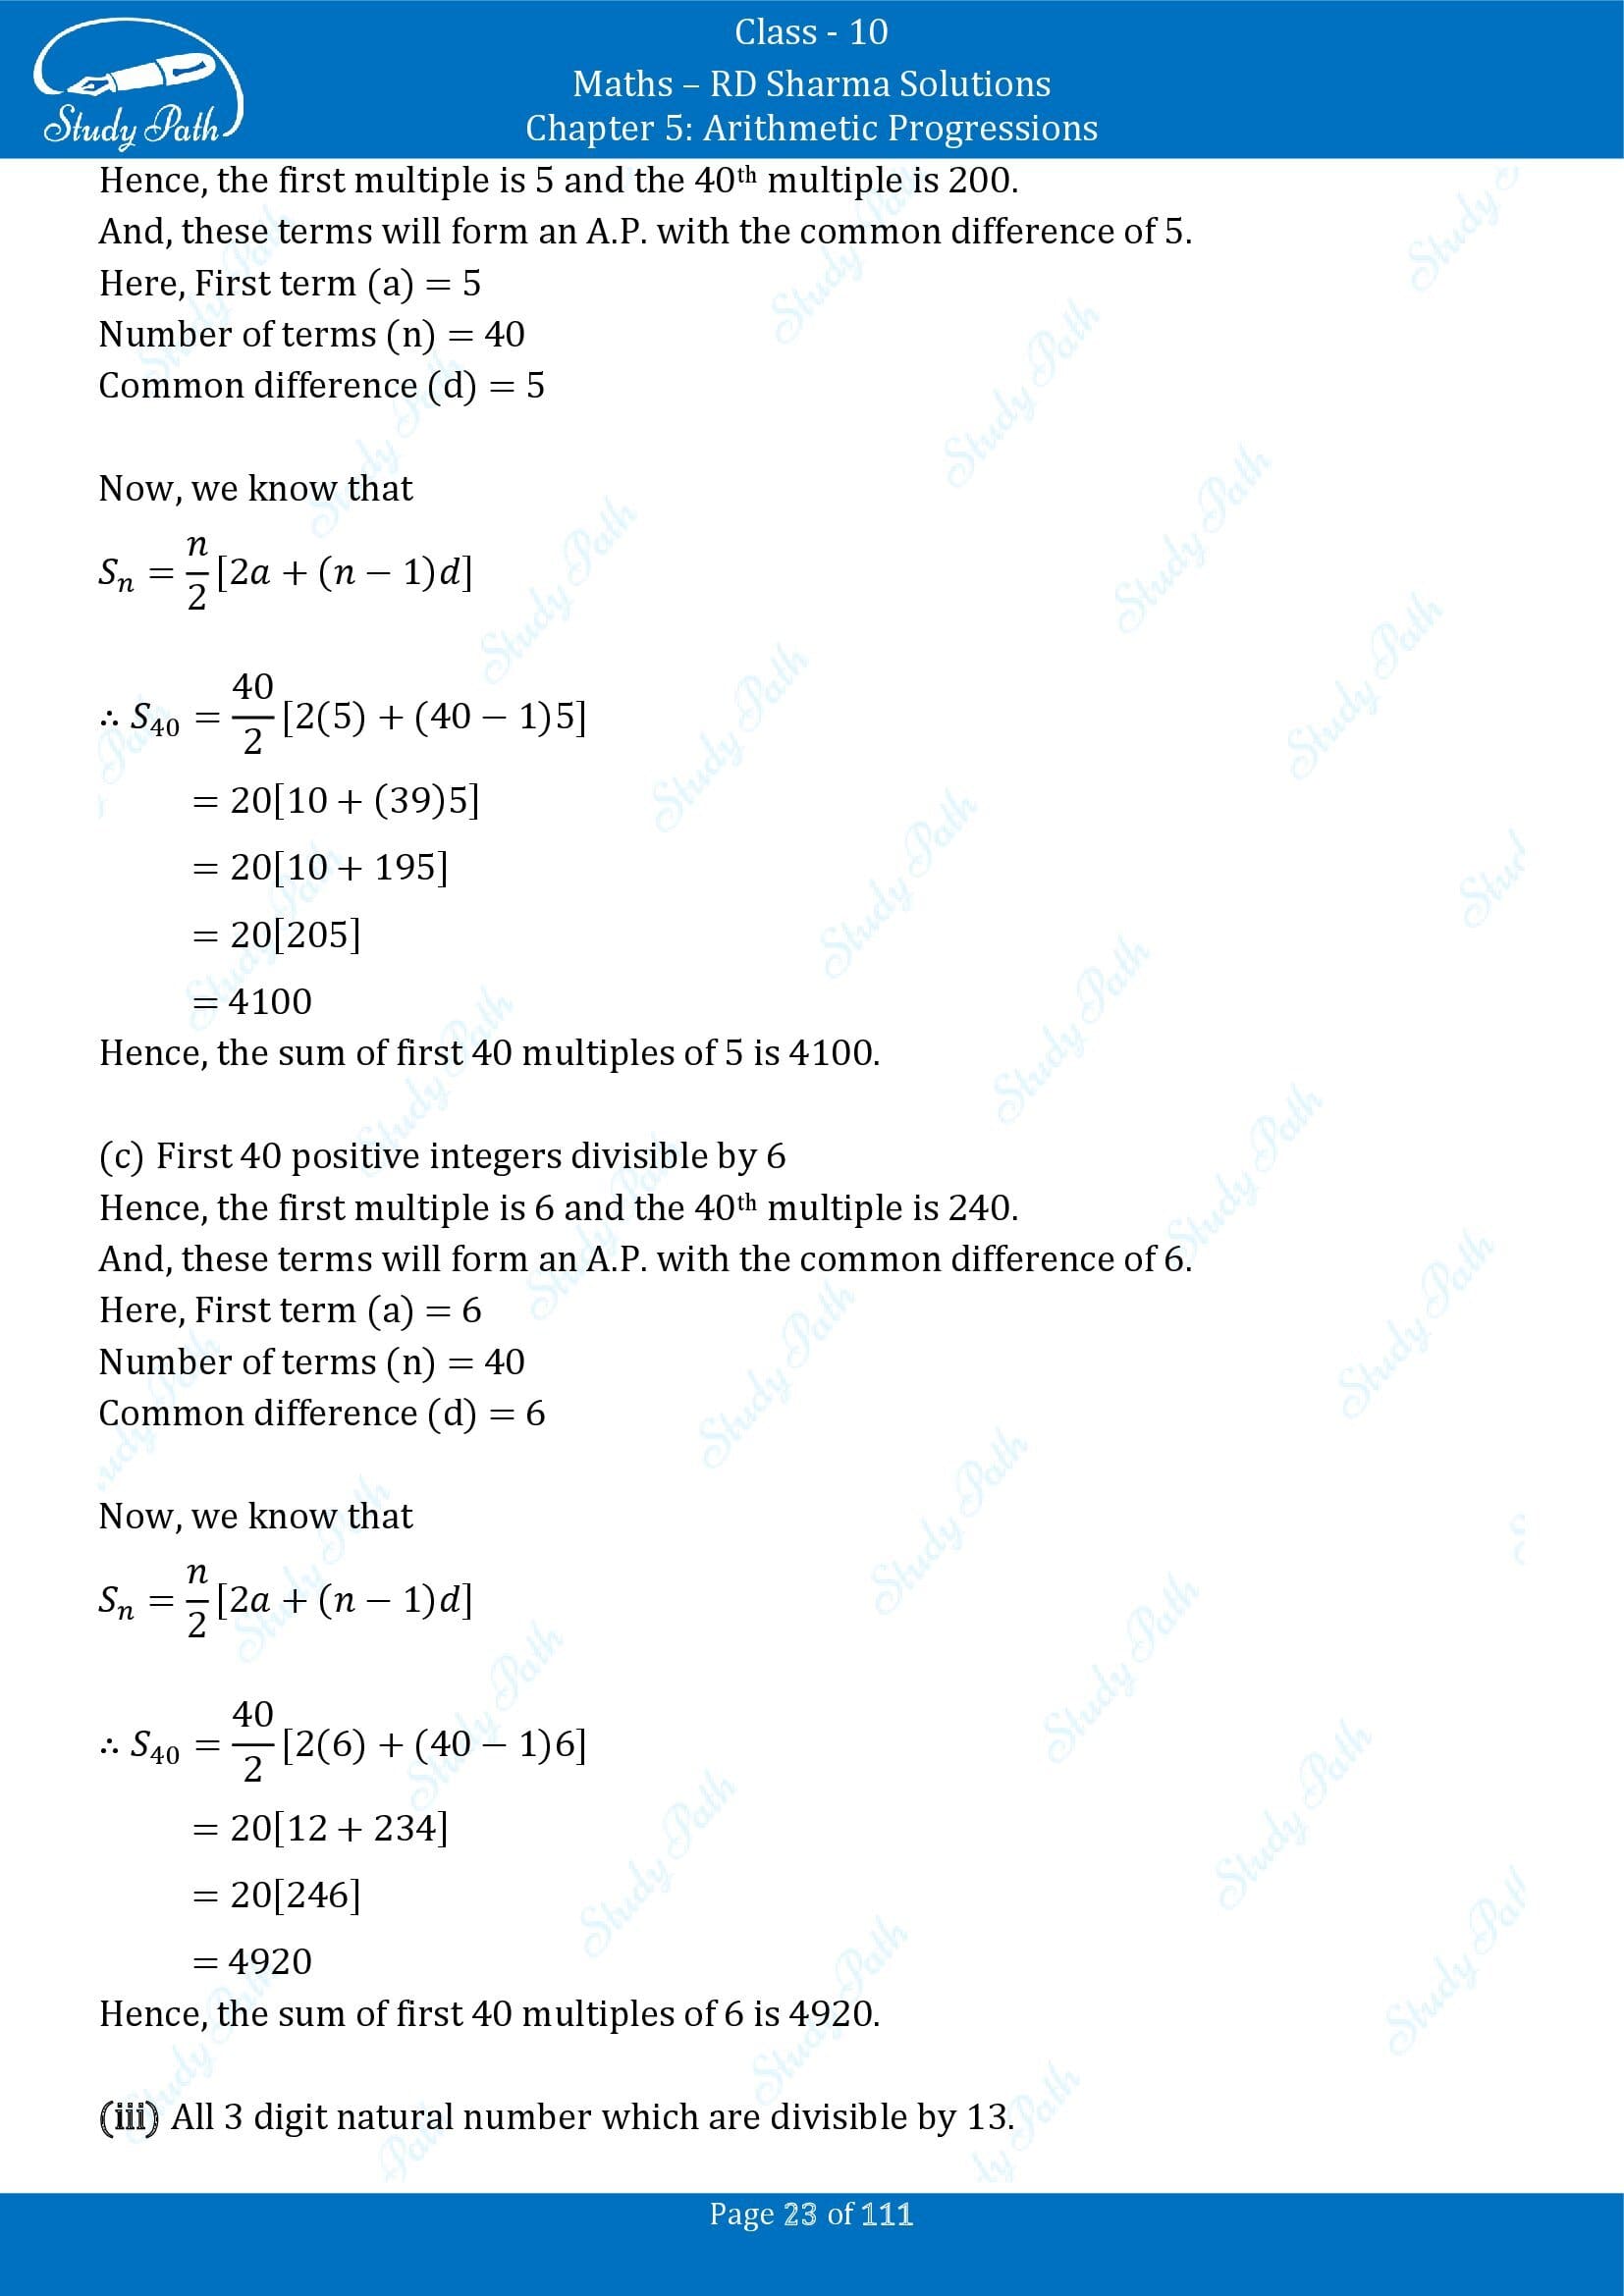 RD Sharma Solutions Class 10 Chapter 5 Arithmetic Progressions Exercise 5.6 00023